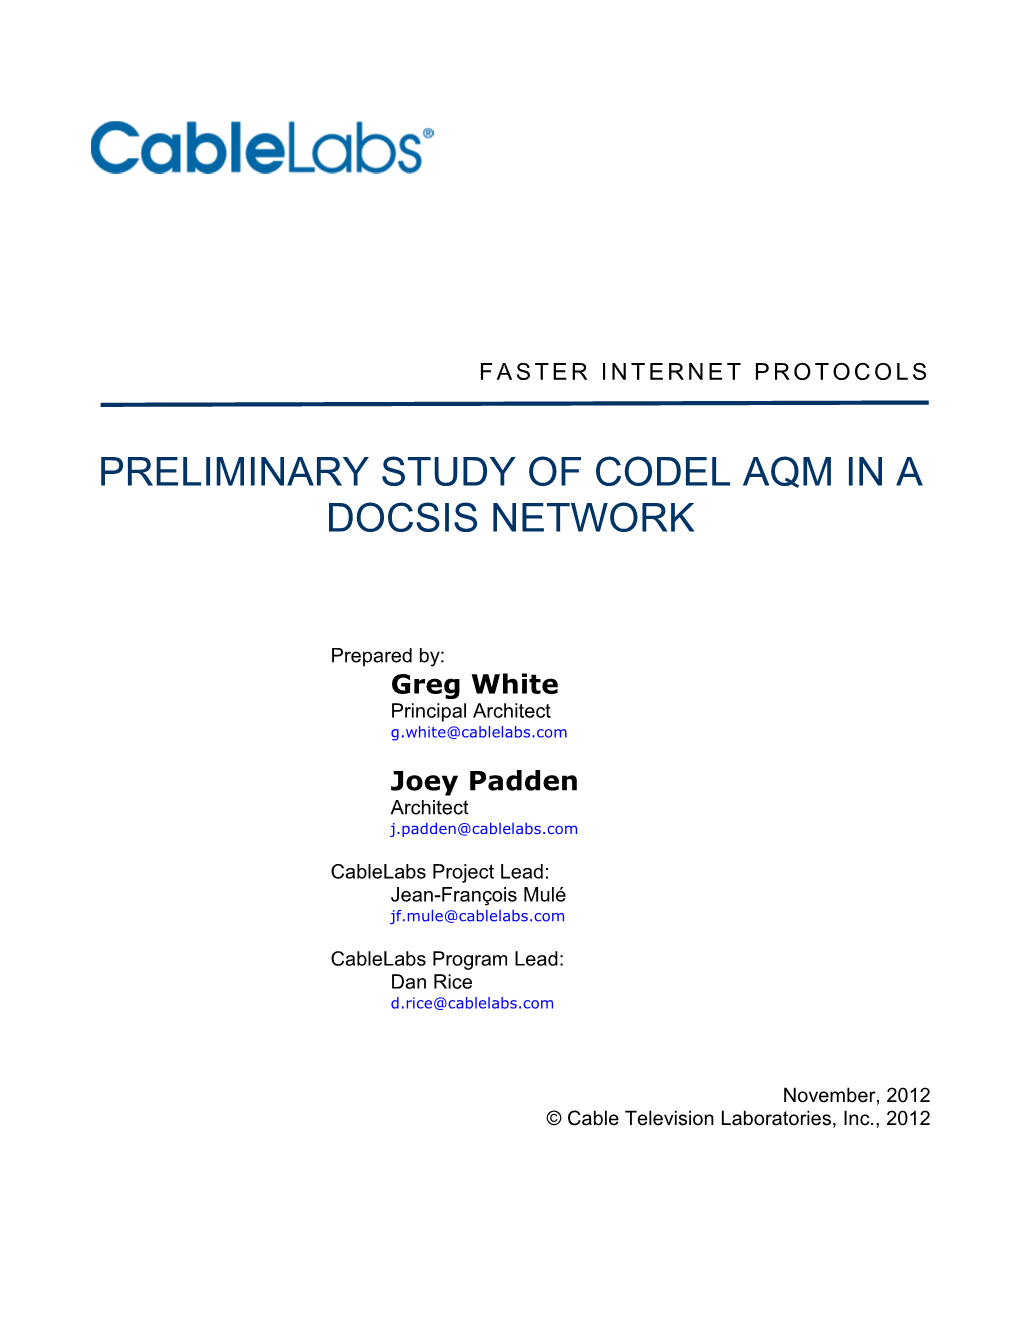 Preliminary Study of Codel Aqm in a Docsis Network